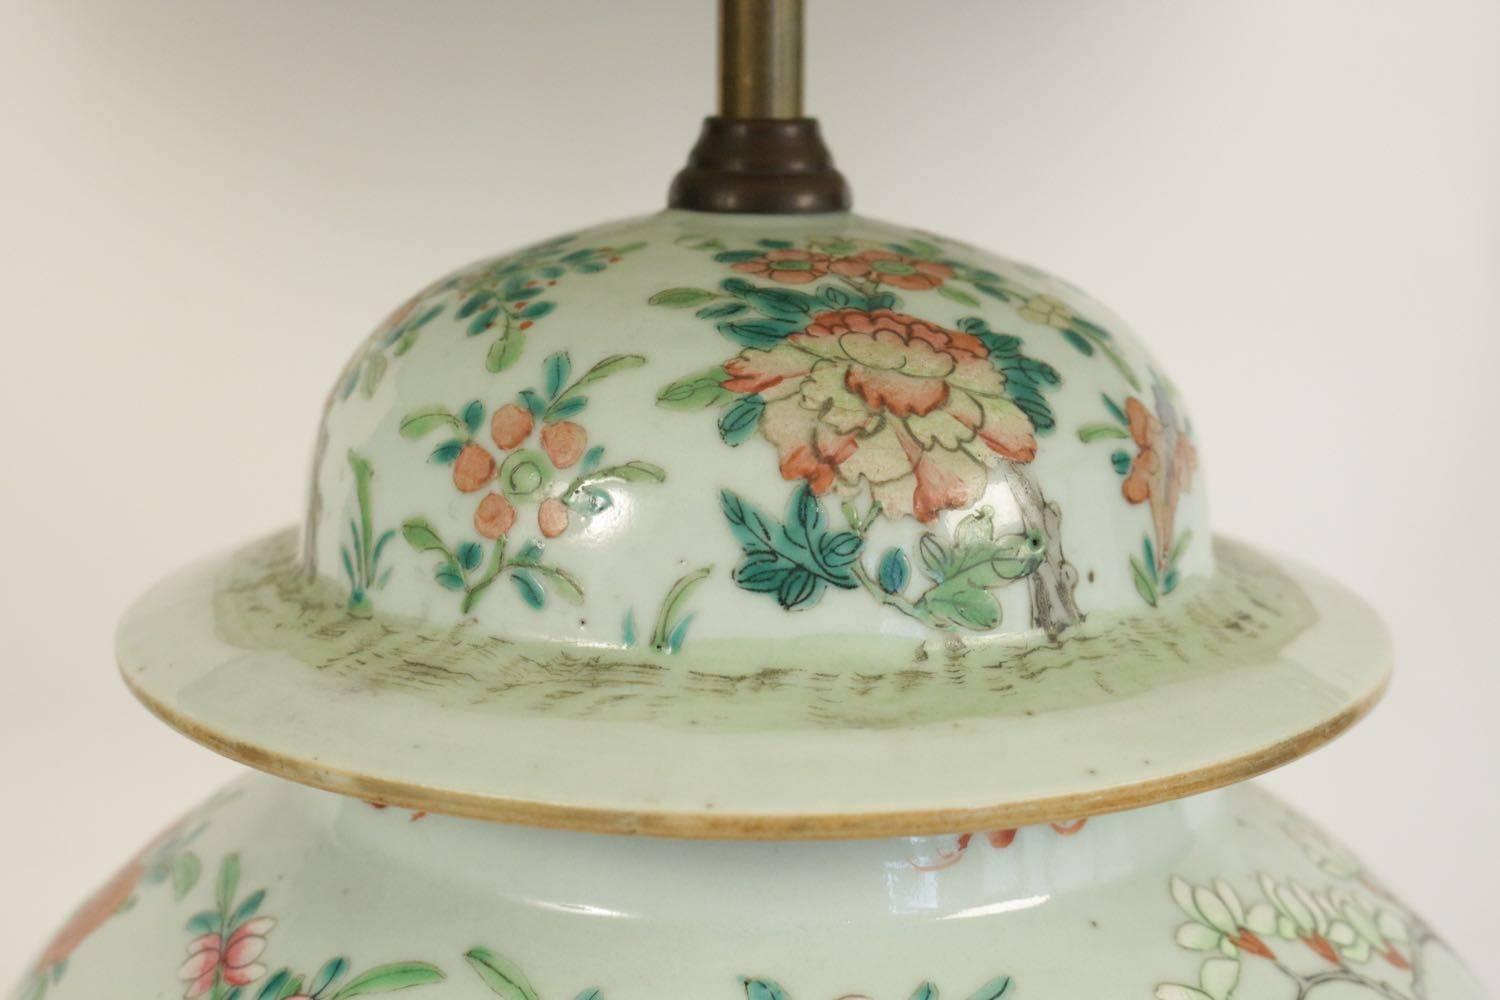 Chinese Export Important Chinese Porcelain Lamp, circa 1890-1900, China, Antique